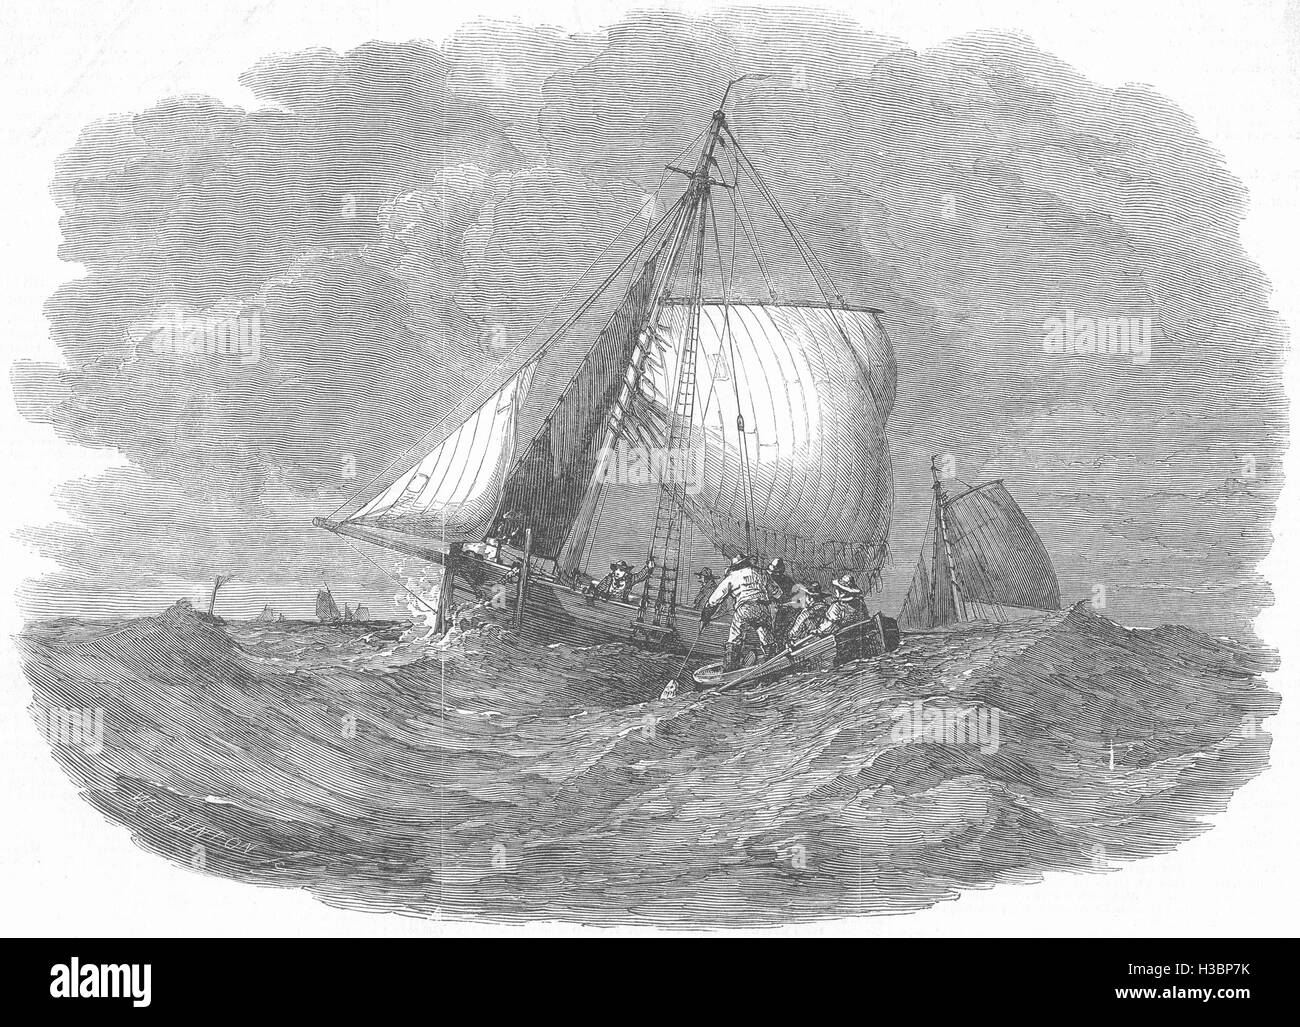 ENGLISH CHANNEL Cod-fishing off the Dogger Bank 1847. The